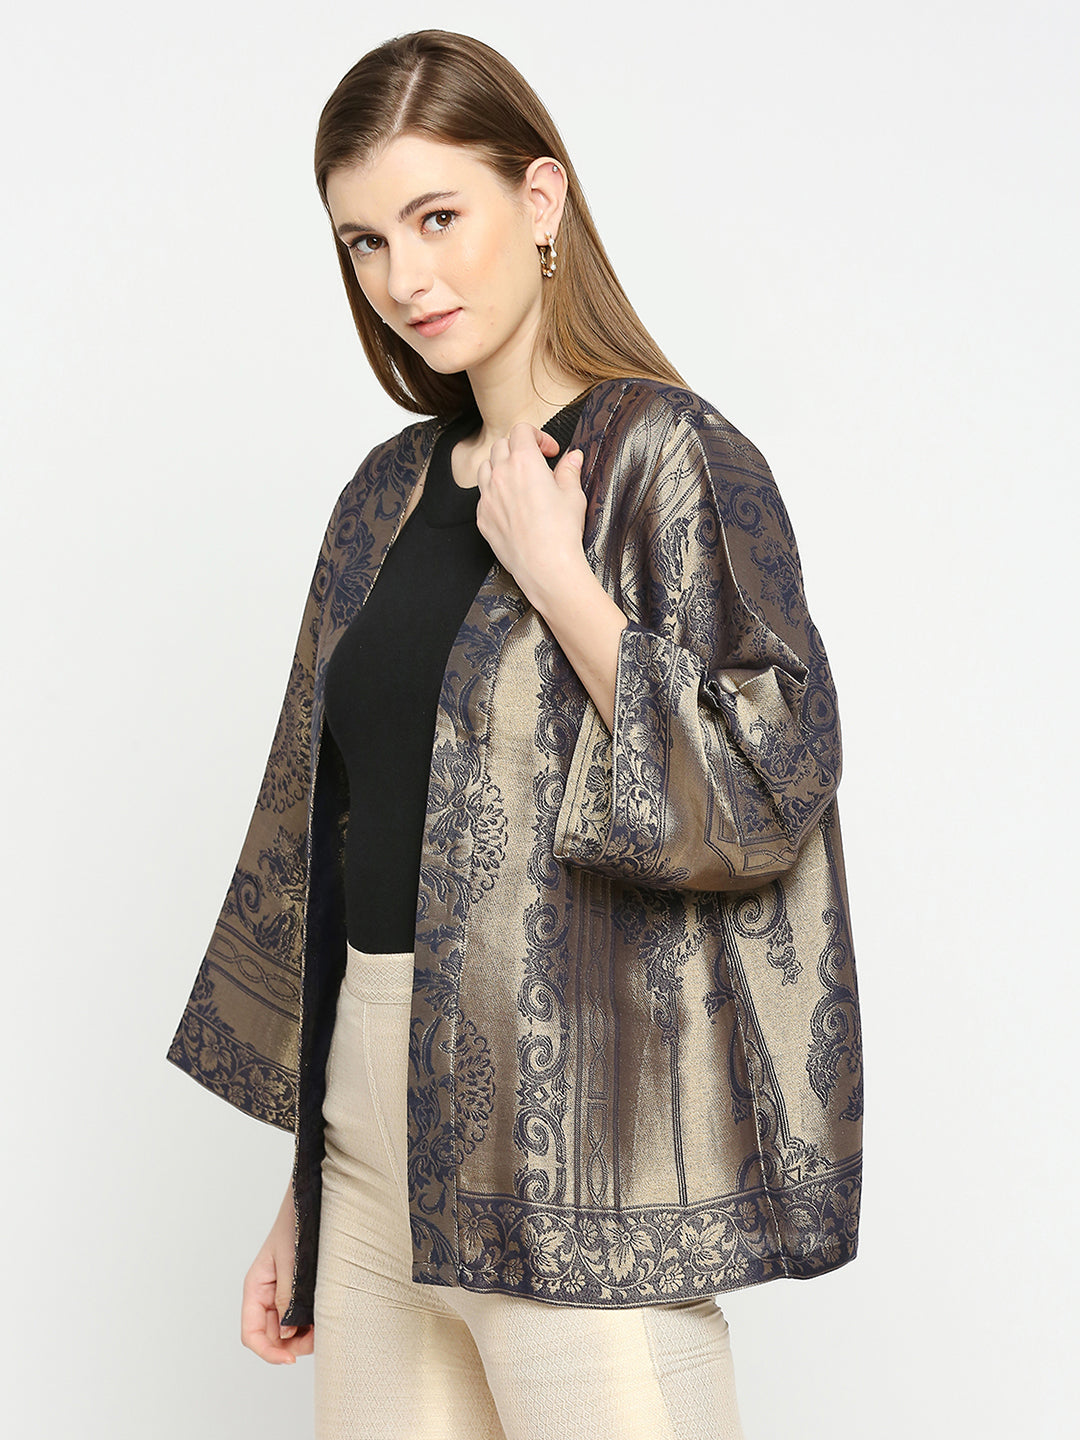 Brocade Navy Blue French Patterned Jacket